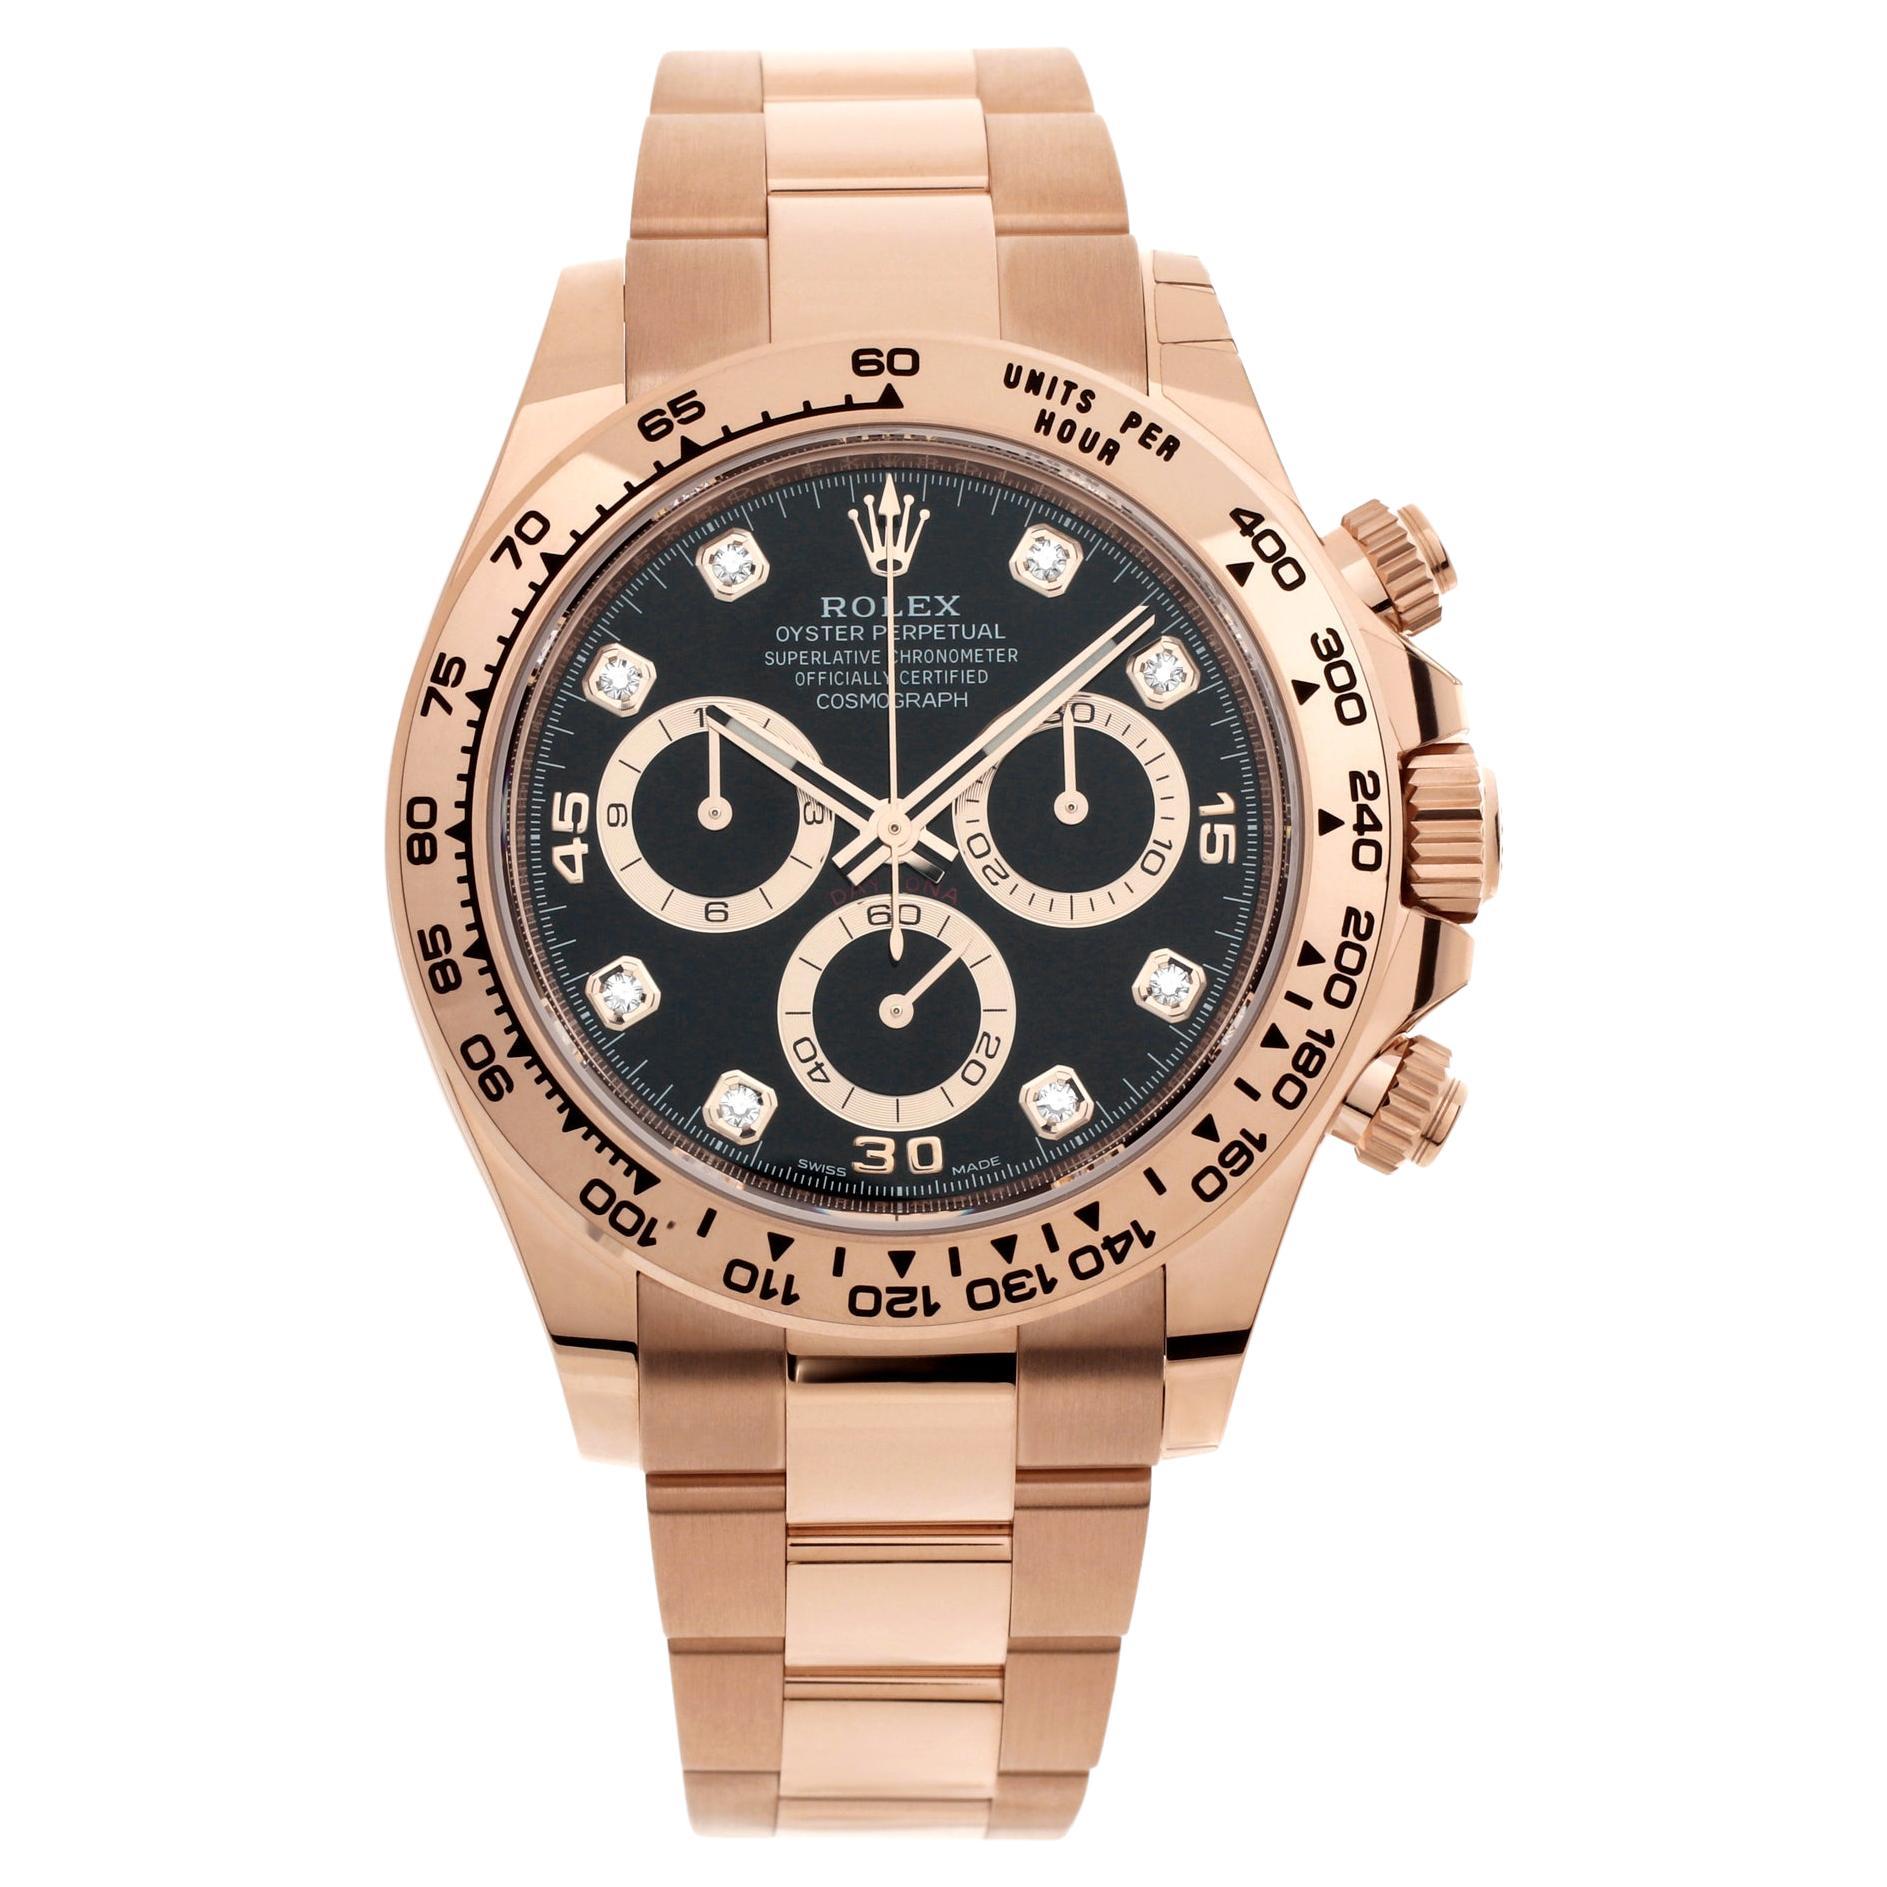 How long is the waiting list for a Rolex Daytona?